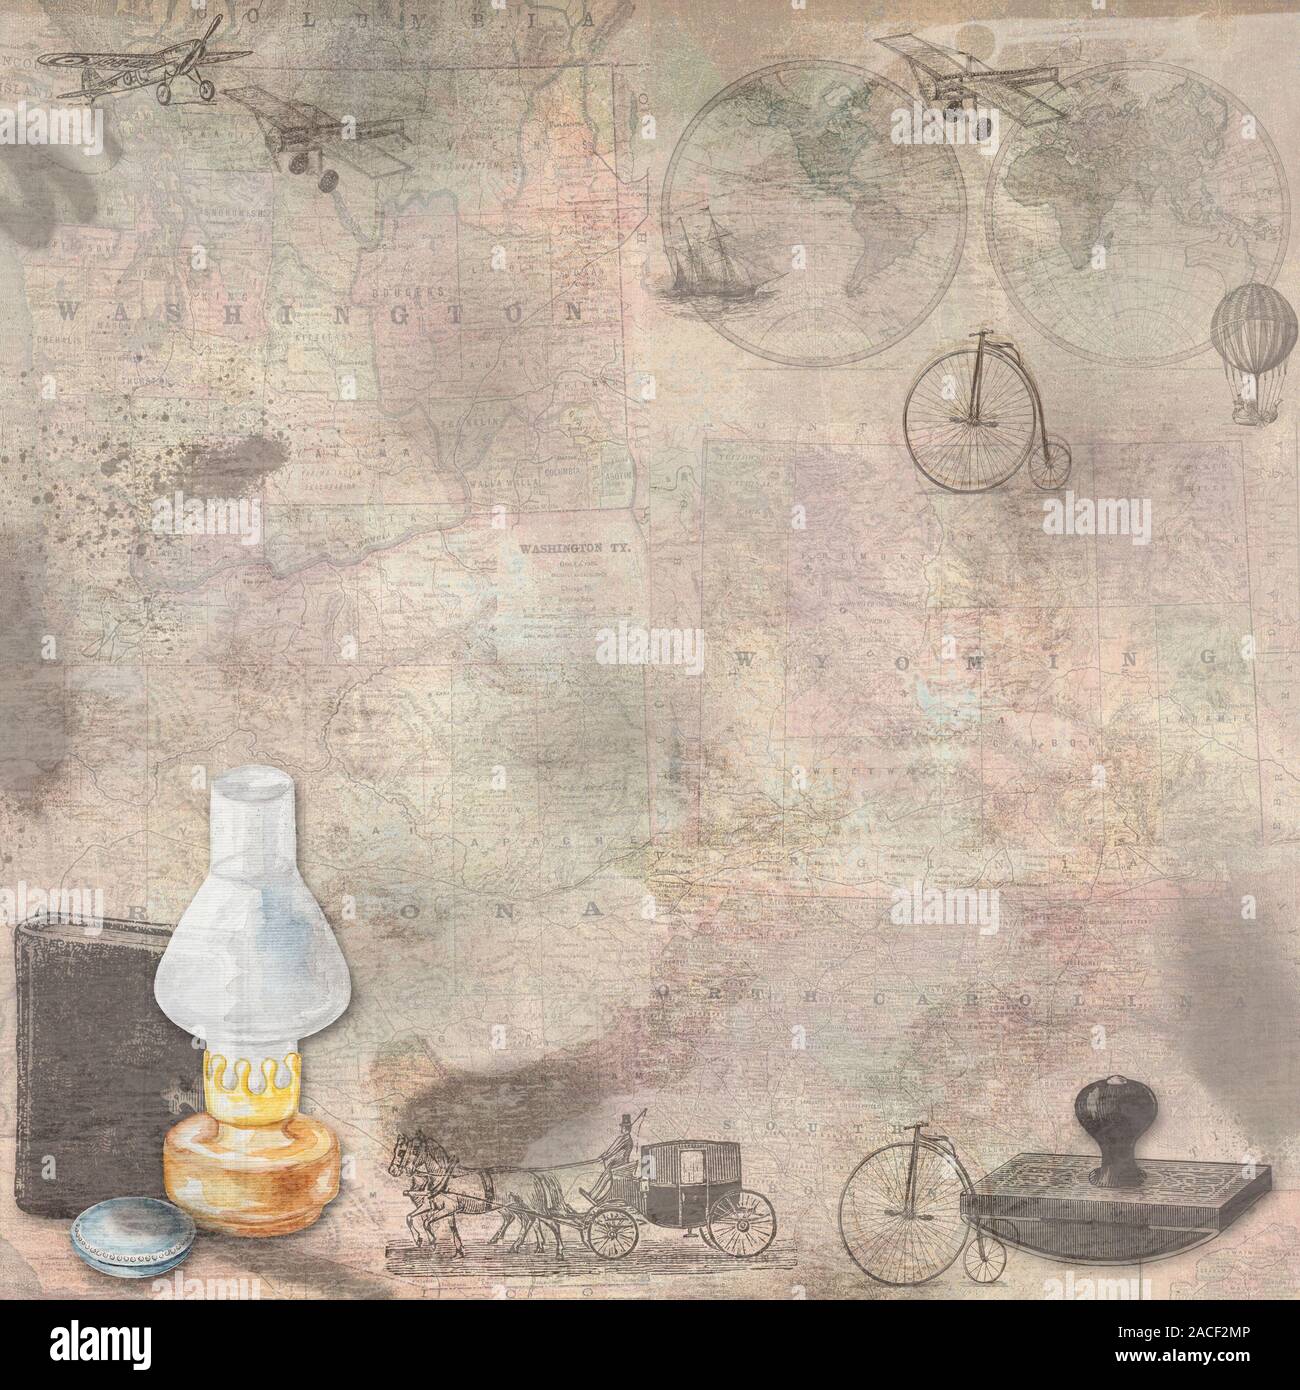 Vintage map objects digital paper in a 12x12 with retro objects, a book, blotter, lantern, paper weight in an ephemera style graphic. Stock Photo